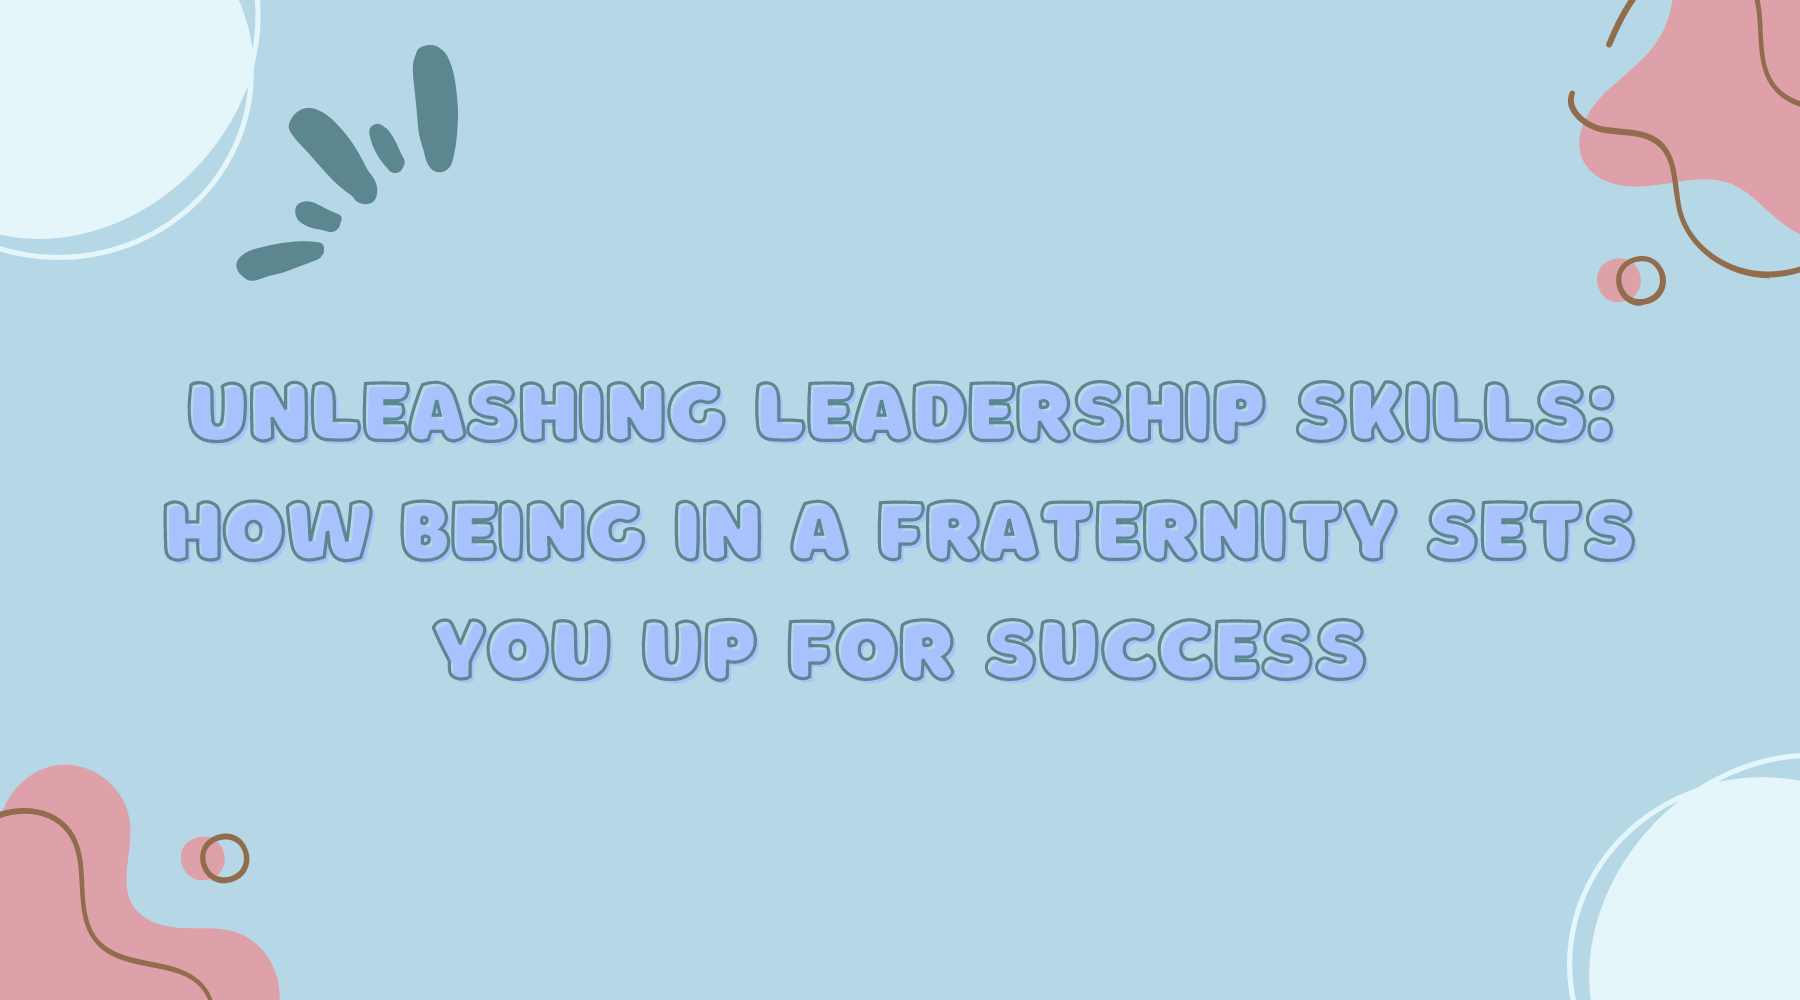 Unleashing Leadership Skills: How Being in a Fraternity Sets You Up for Success